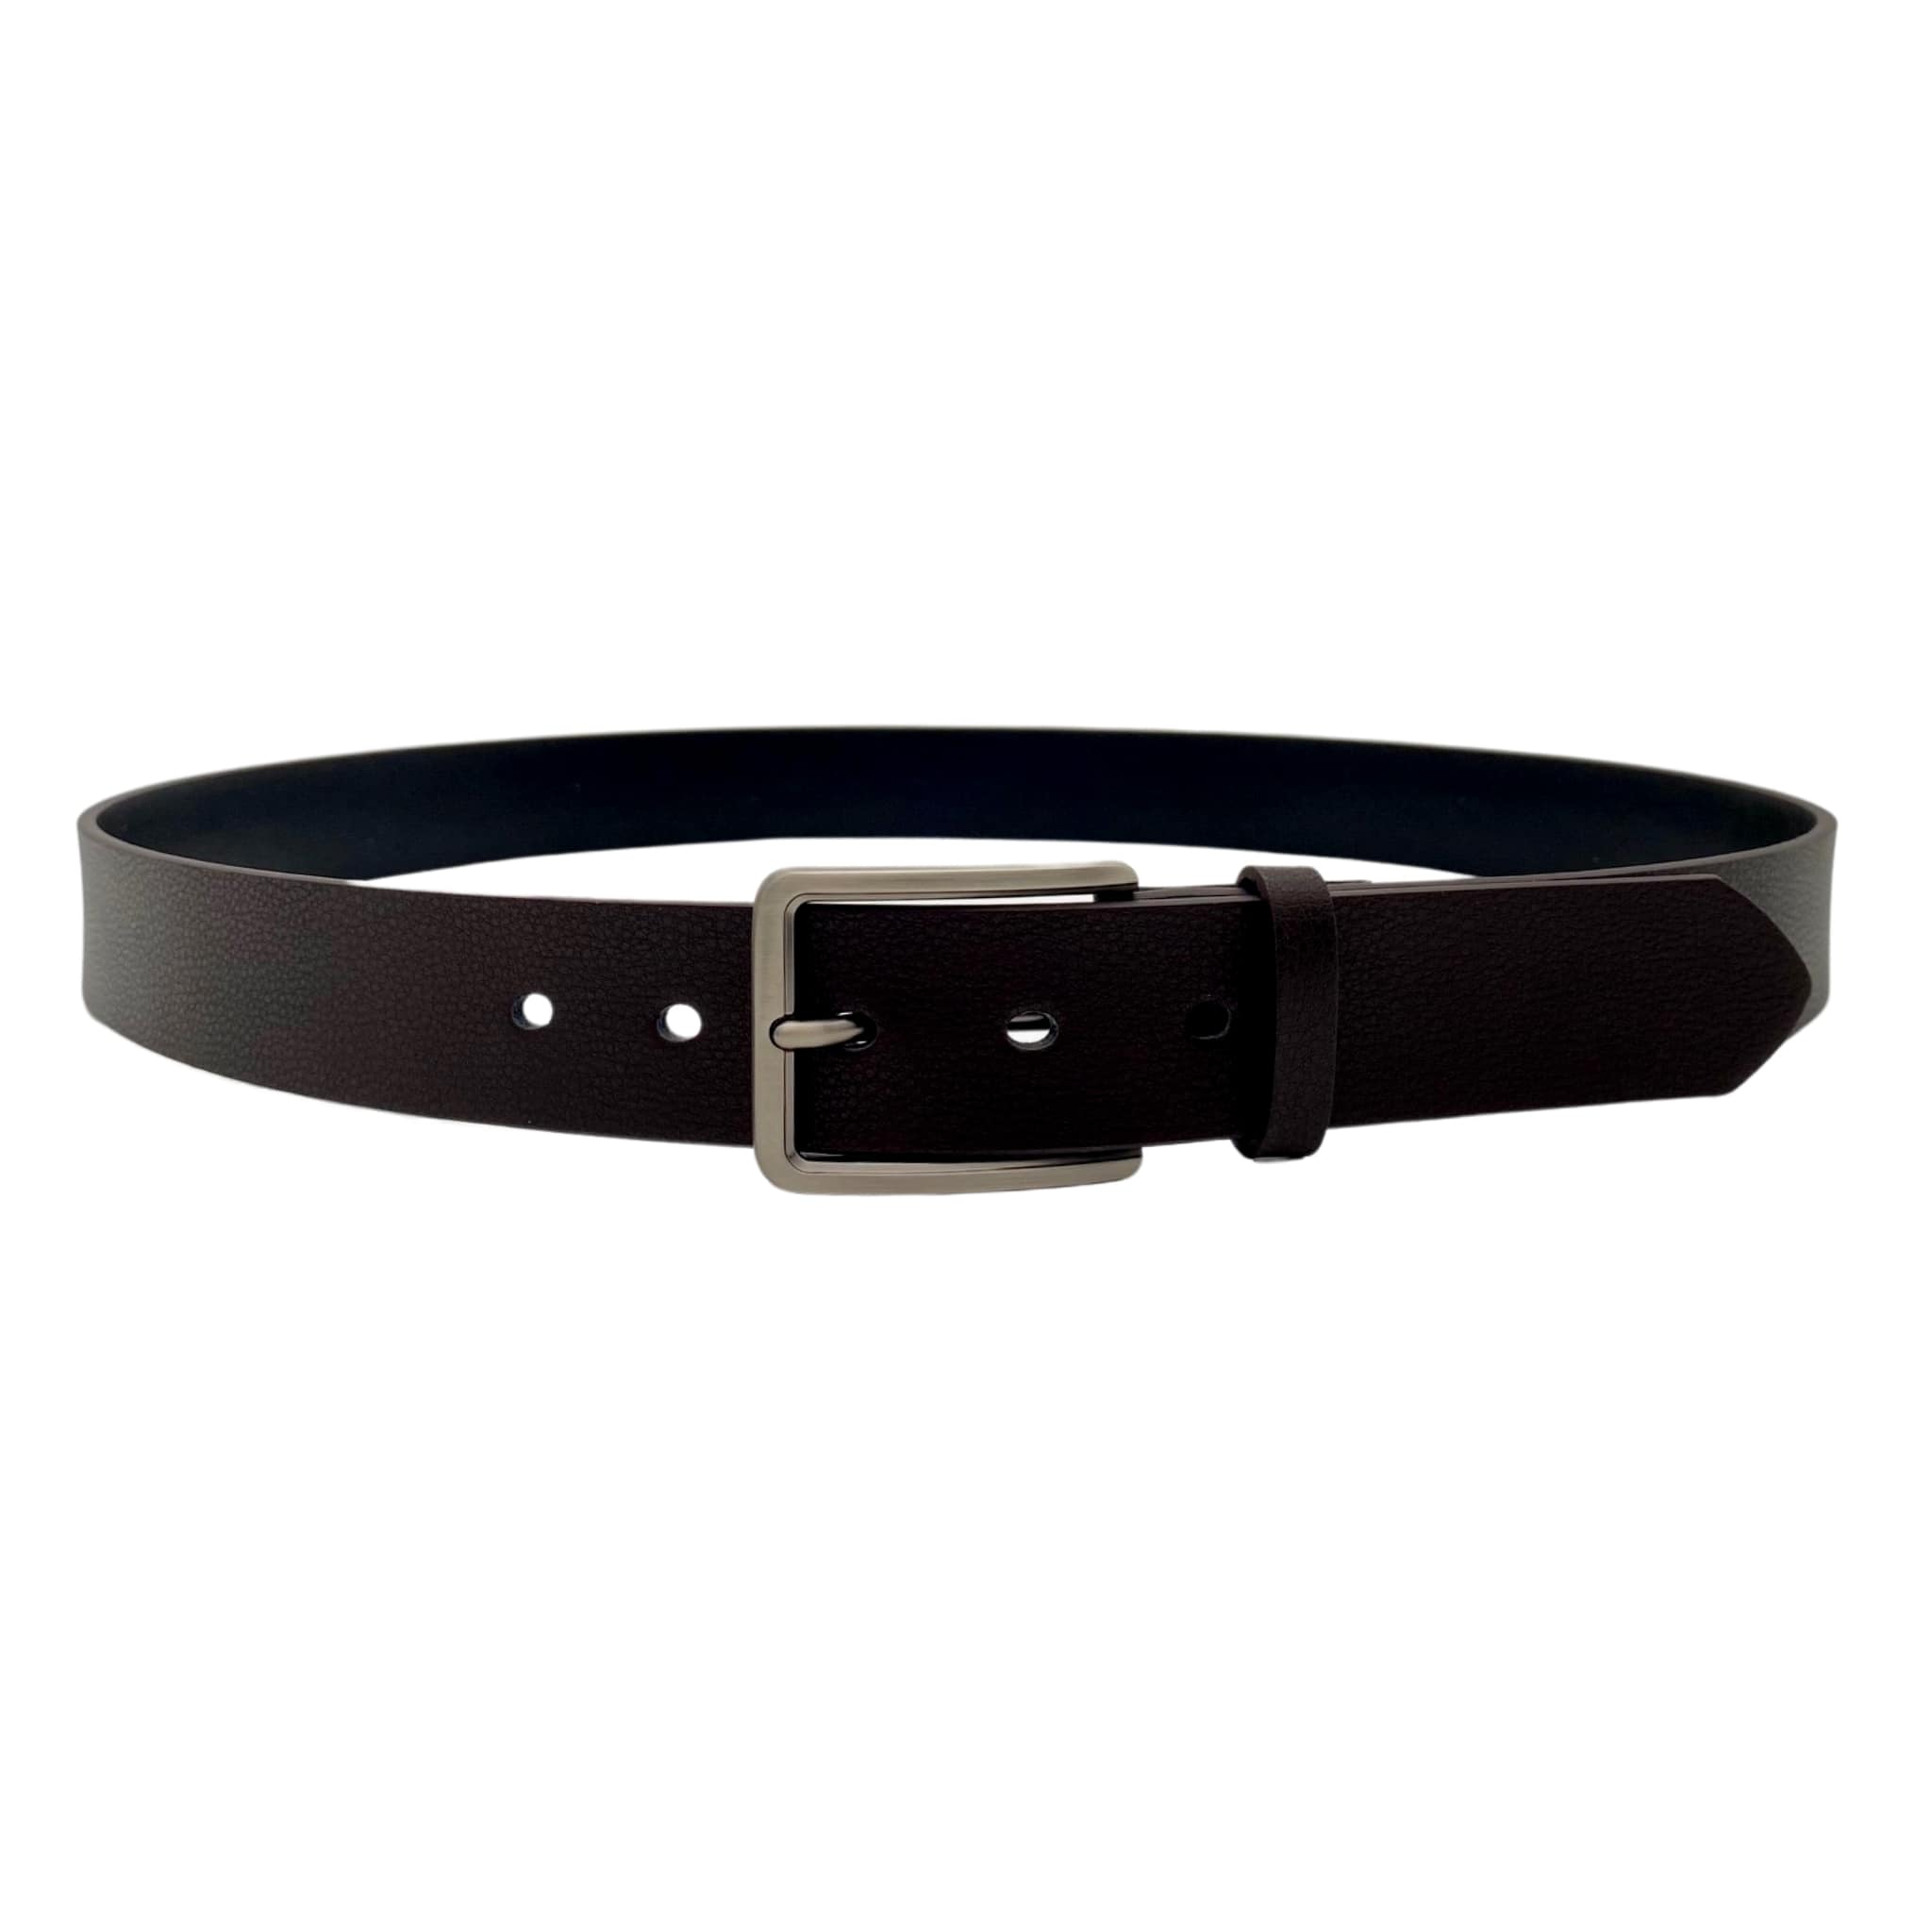 Buy Stylish Trendy 360 Degree Rotate Reversible Buckle For Men's Any Types  of Belt, Formal & Casual Cool Look Metal Buckle (Only Buckle) at Amazon.in